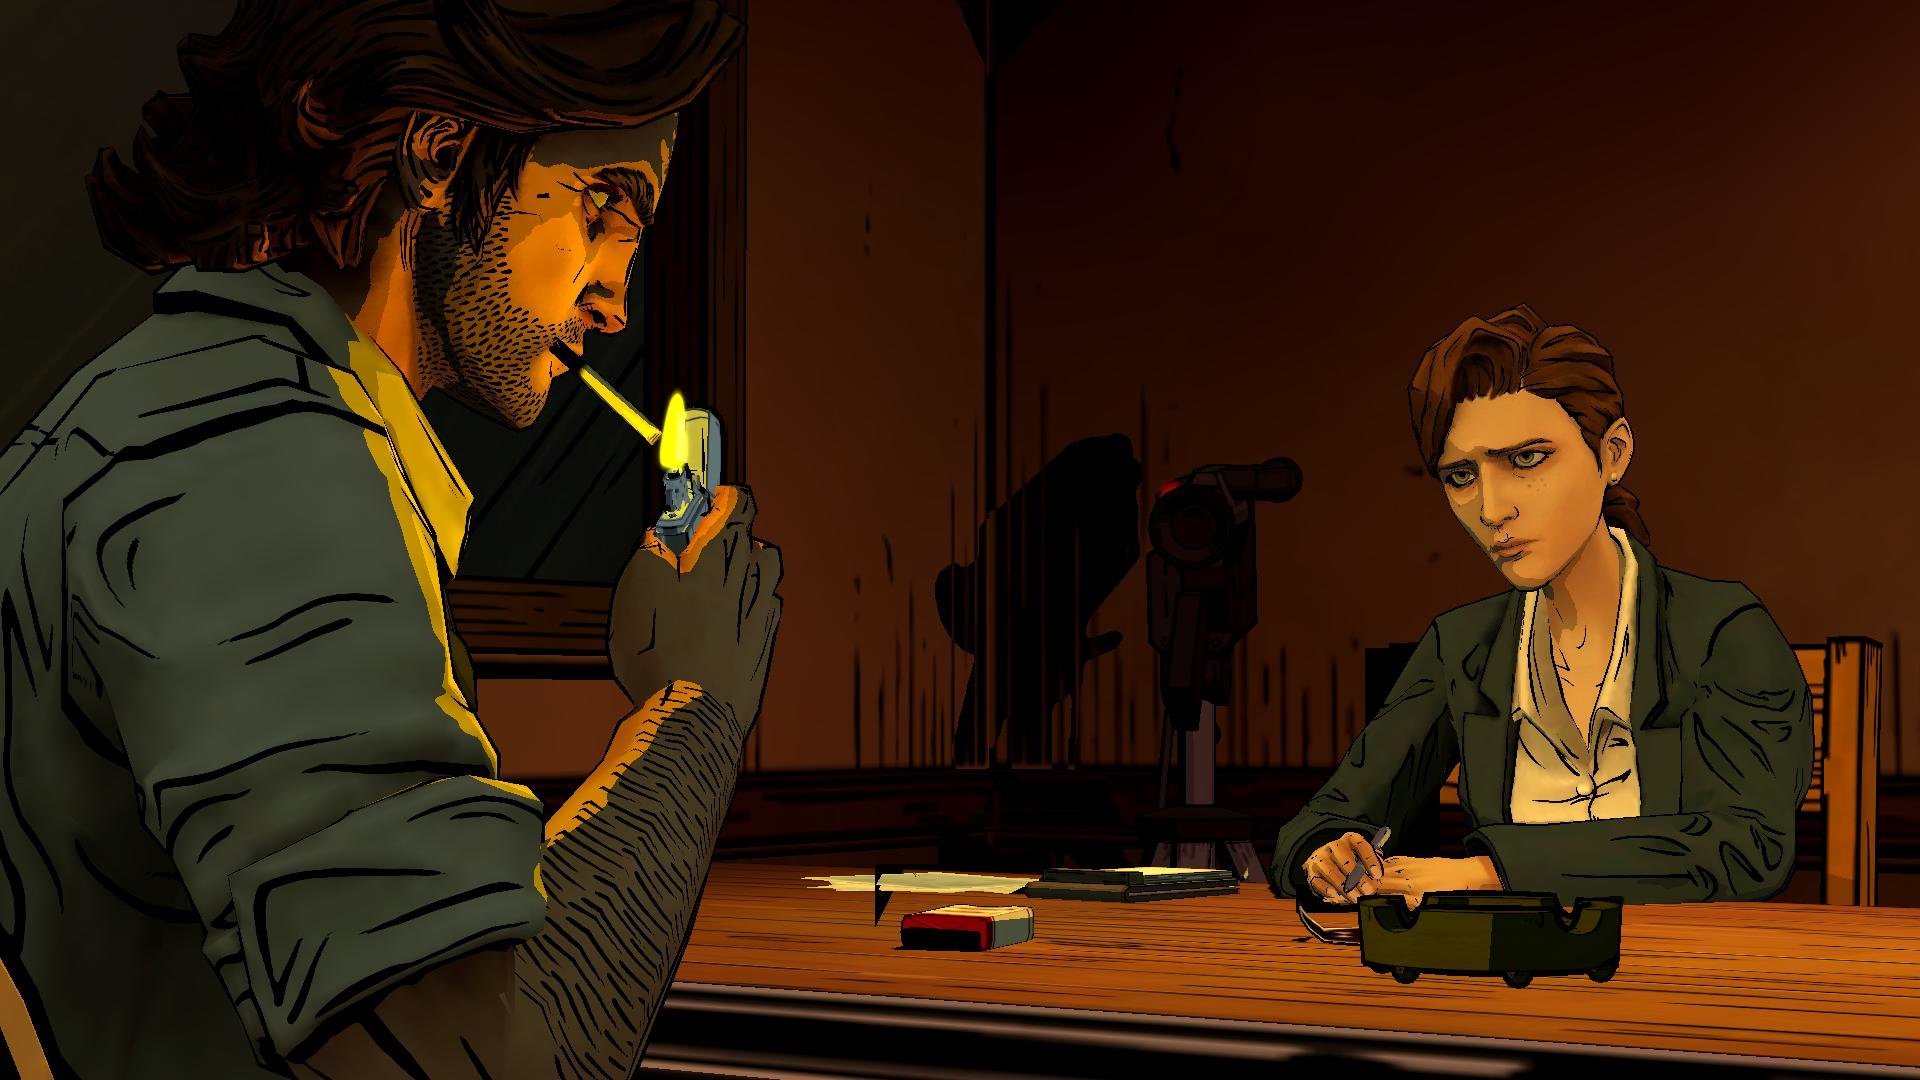 Best The Wolf Among Us Wallpaper Id - The Wolf Among Us - HD Wallpaper 